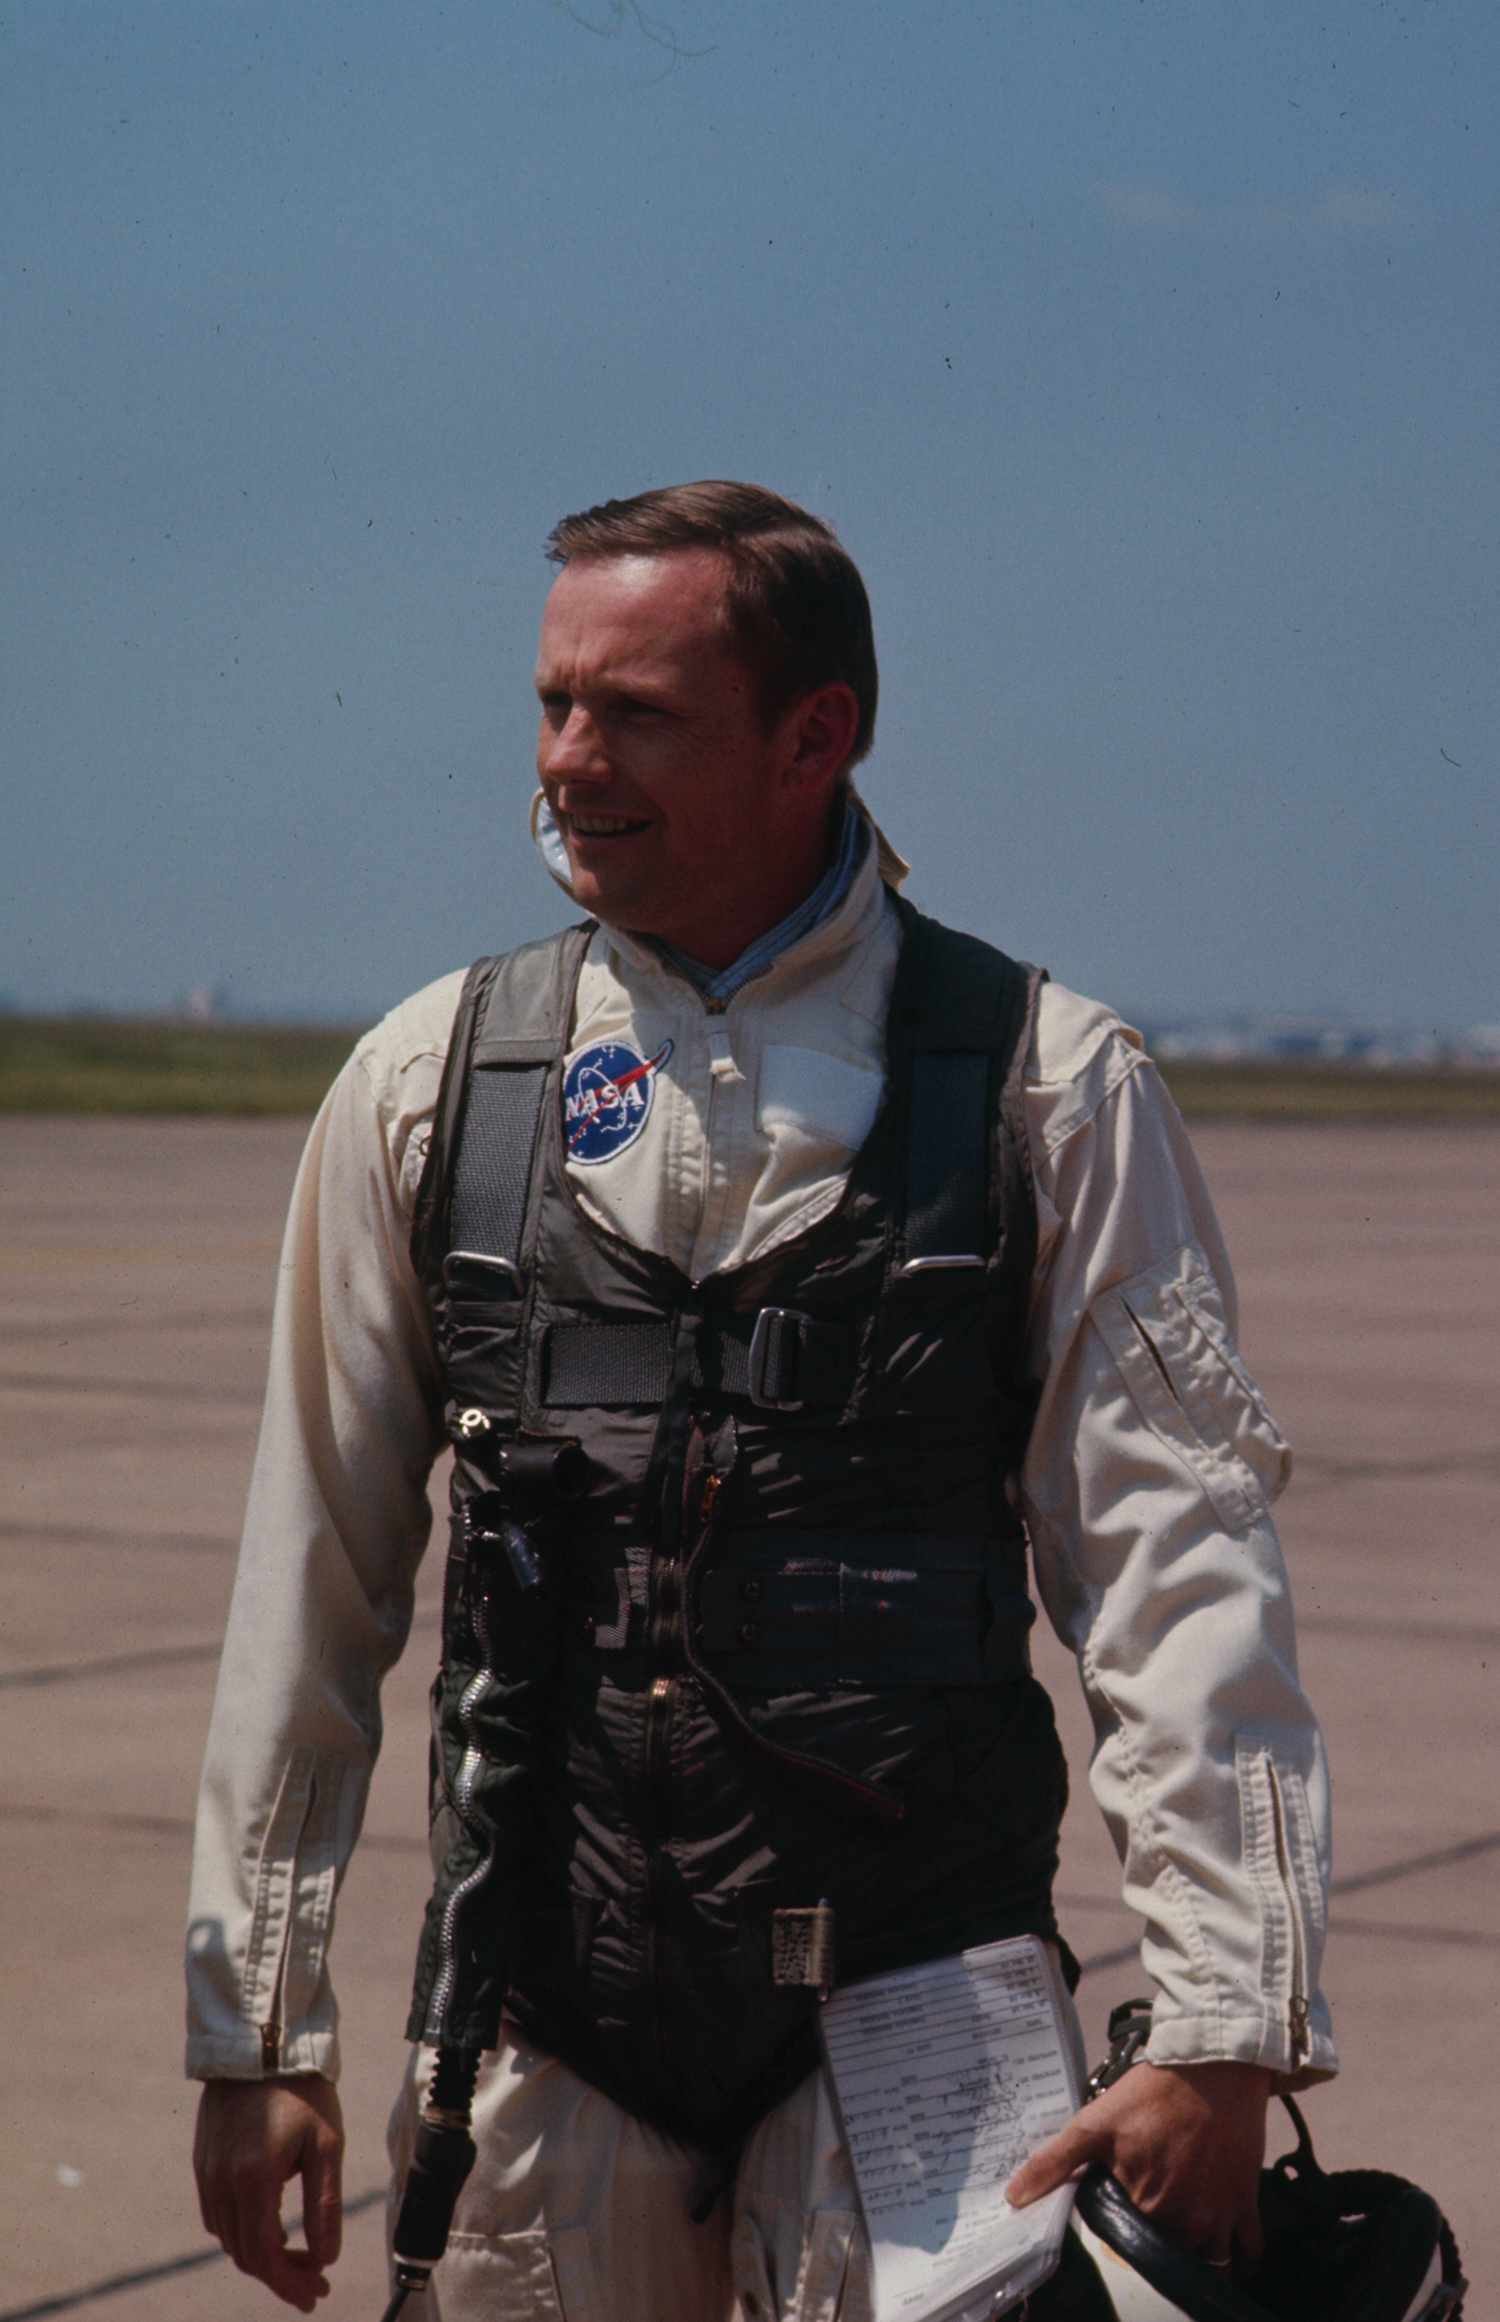 Neil Armstrong training for the Apollo 11 moon mission, Ellington Air Force Base, Texas, 1968.